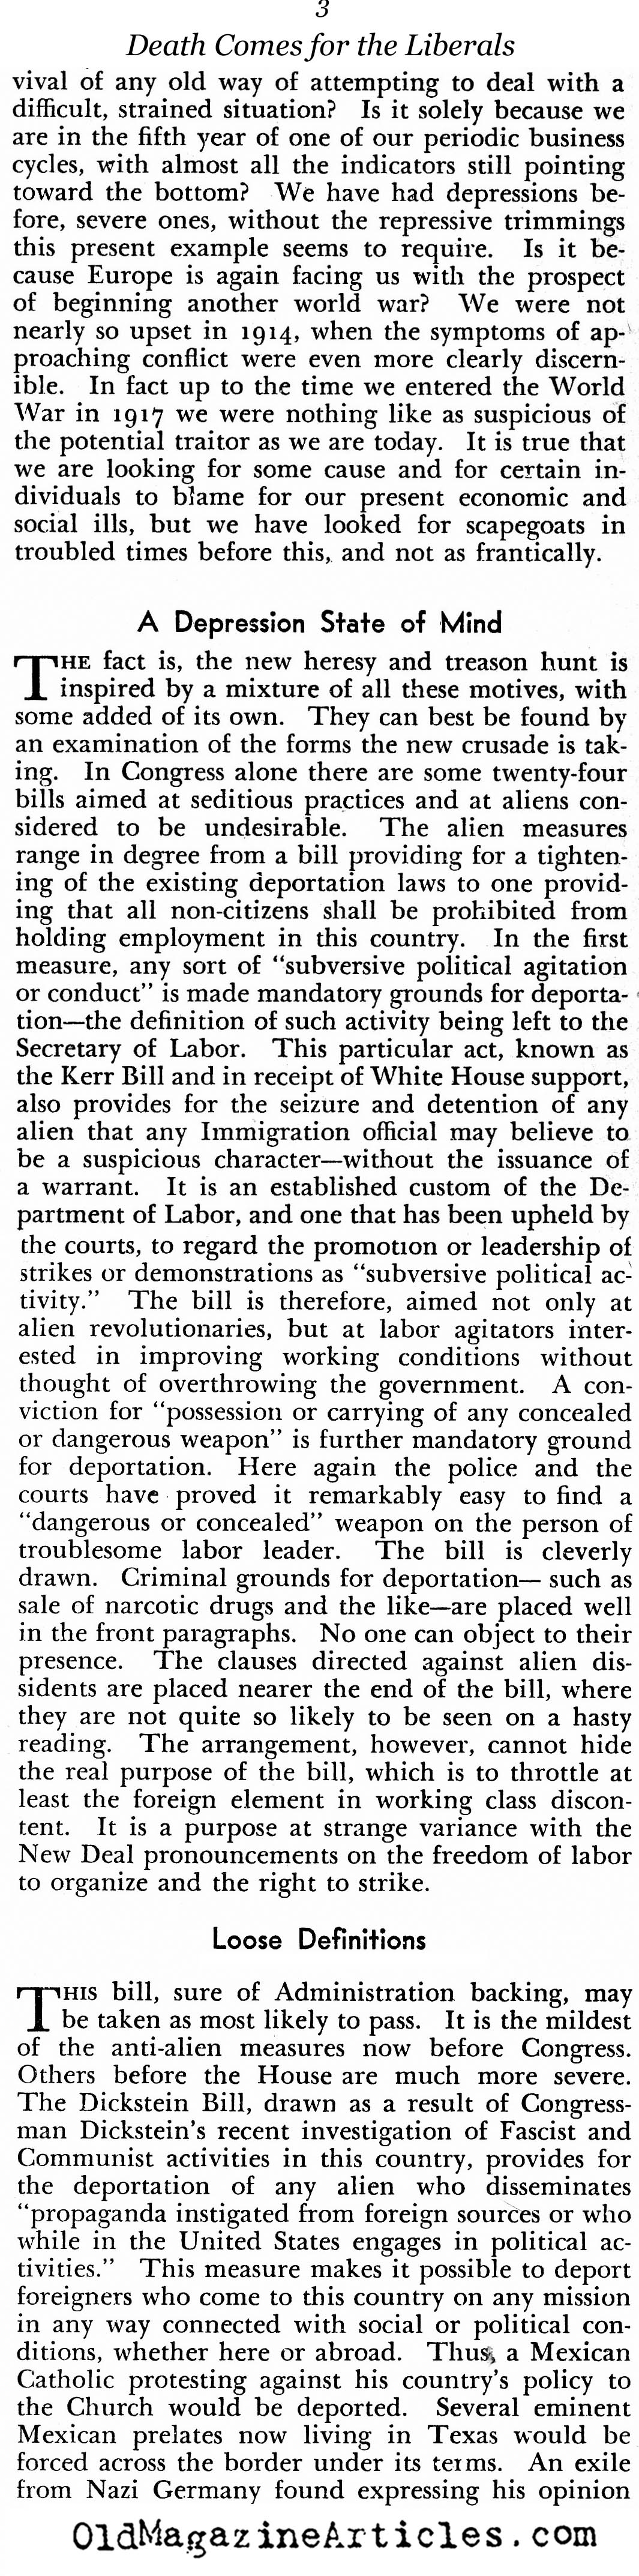 Tyranny At Home (New Outlook Magazine, 1935)